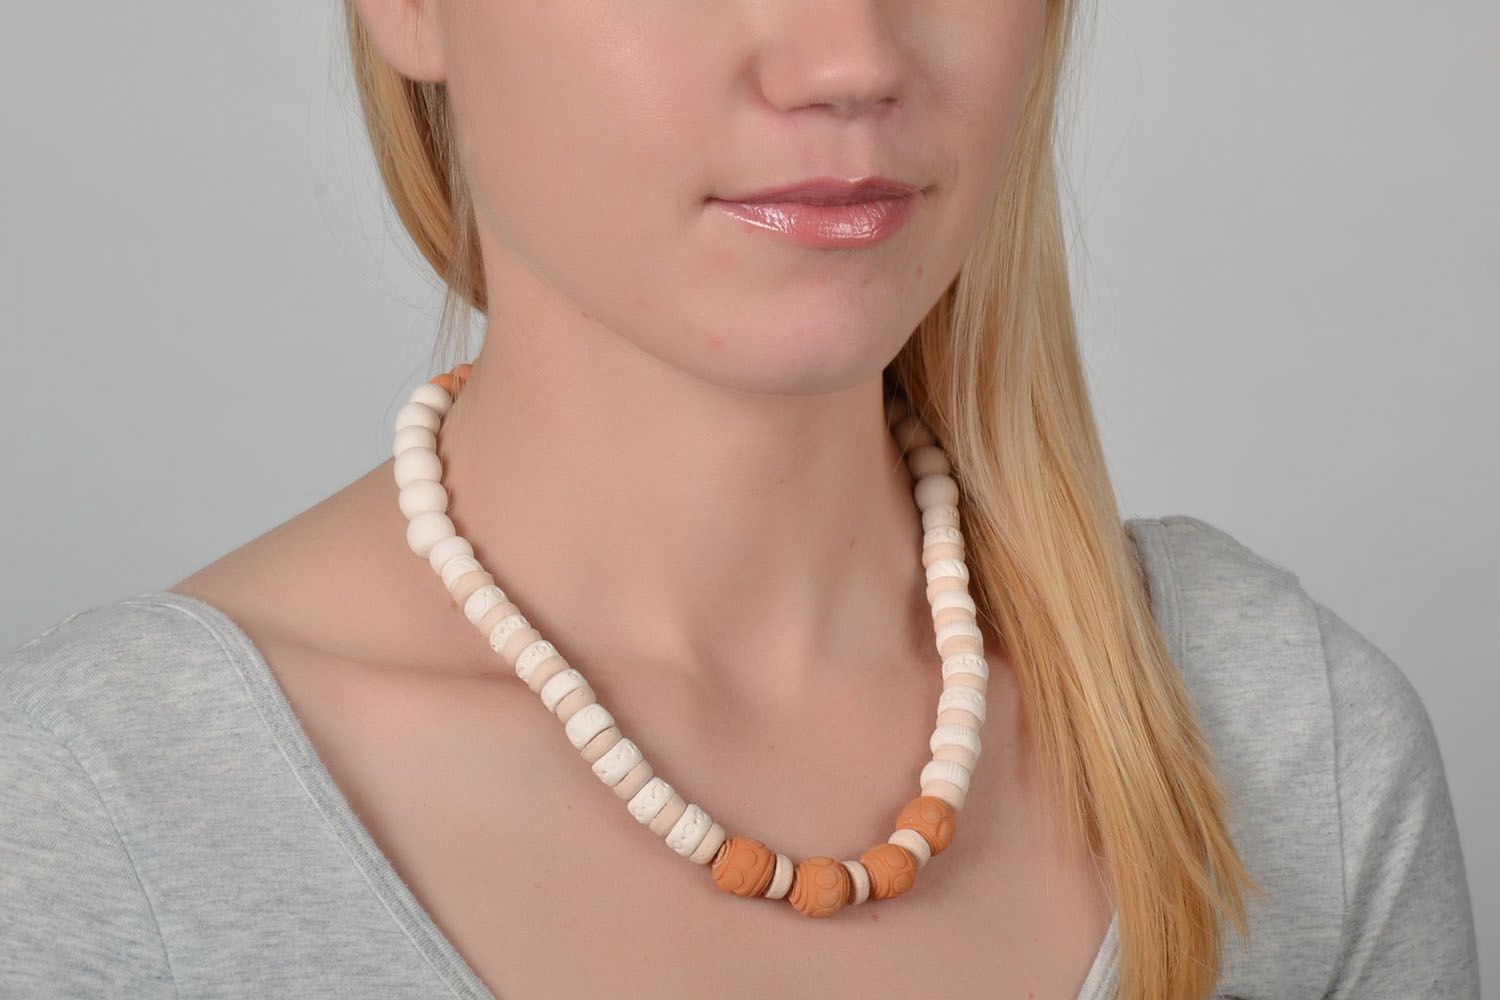 Bead necklace in ethnic style photo 2